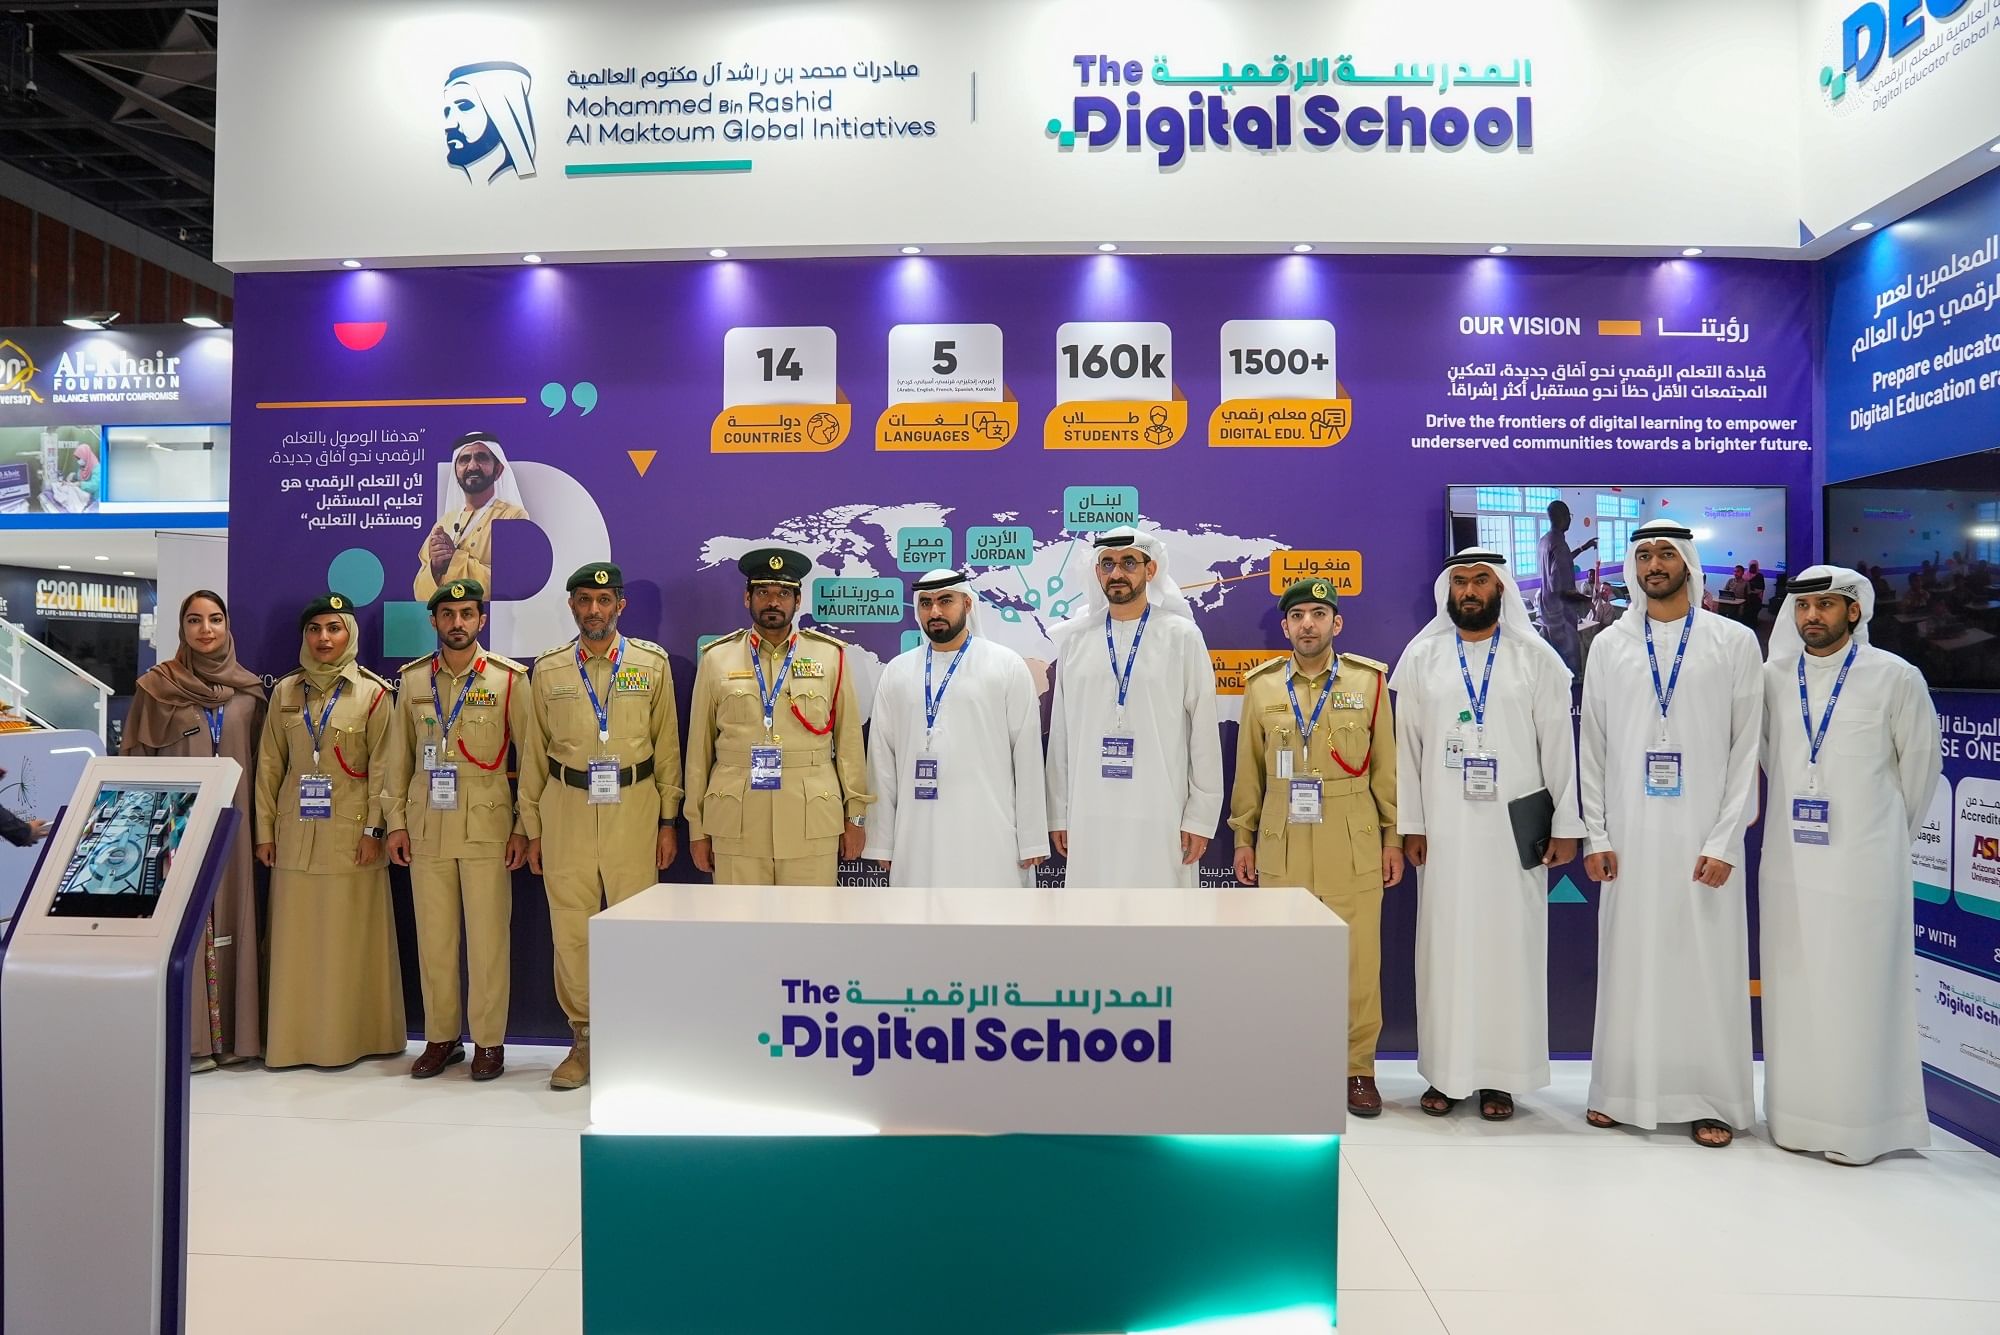 Dubai Police and ‘Digital School’ collaborate to support community initiatives